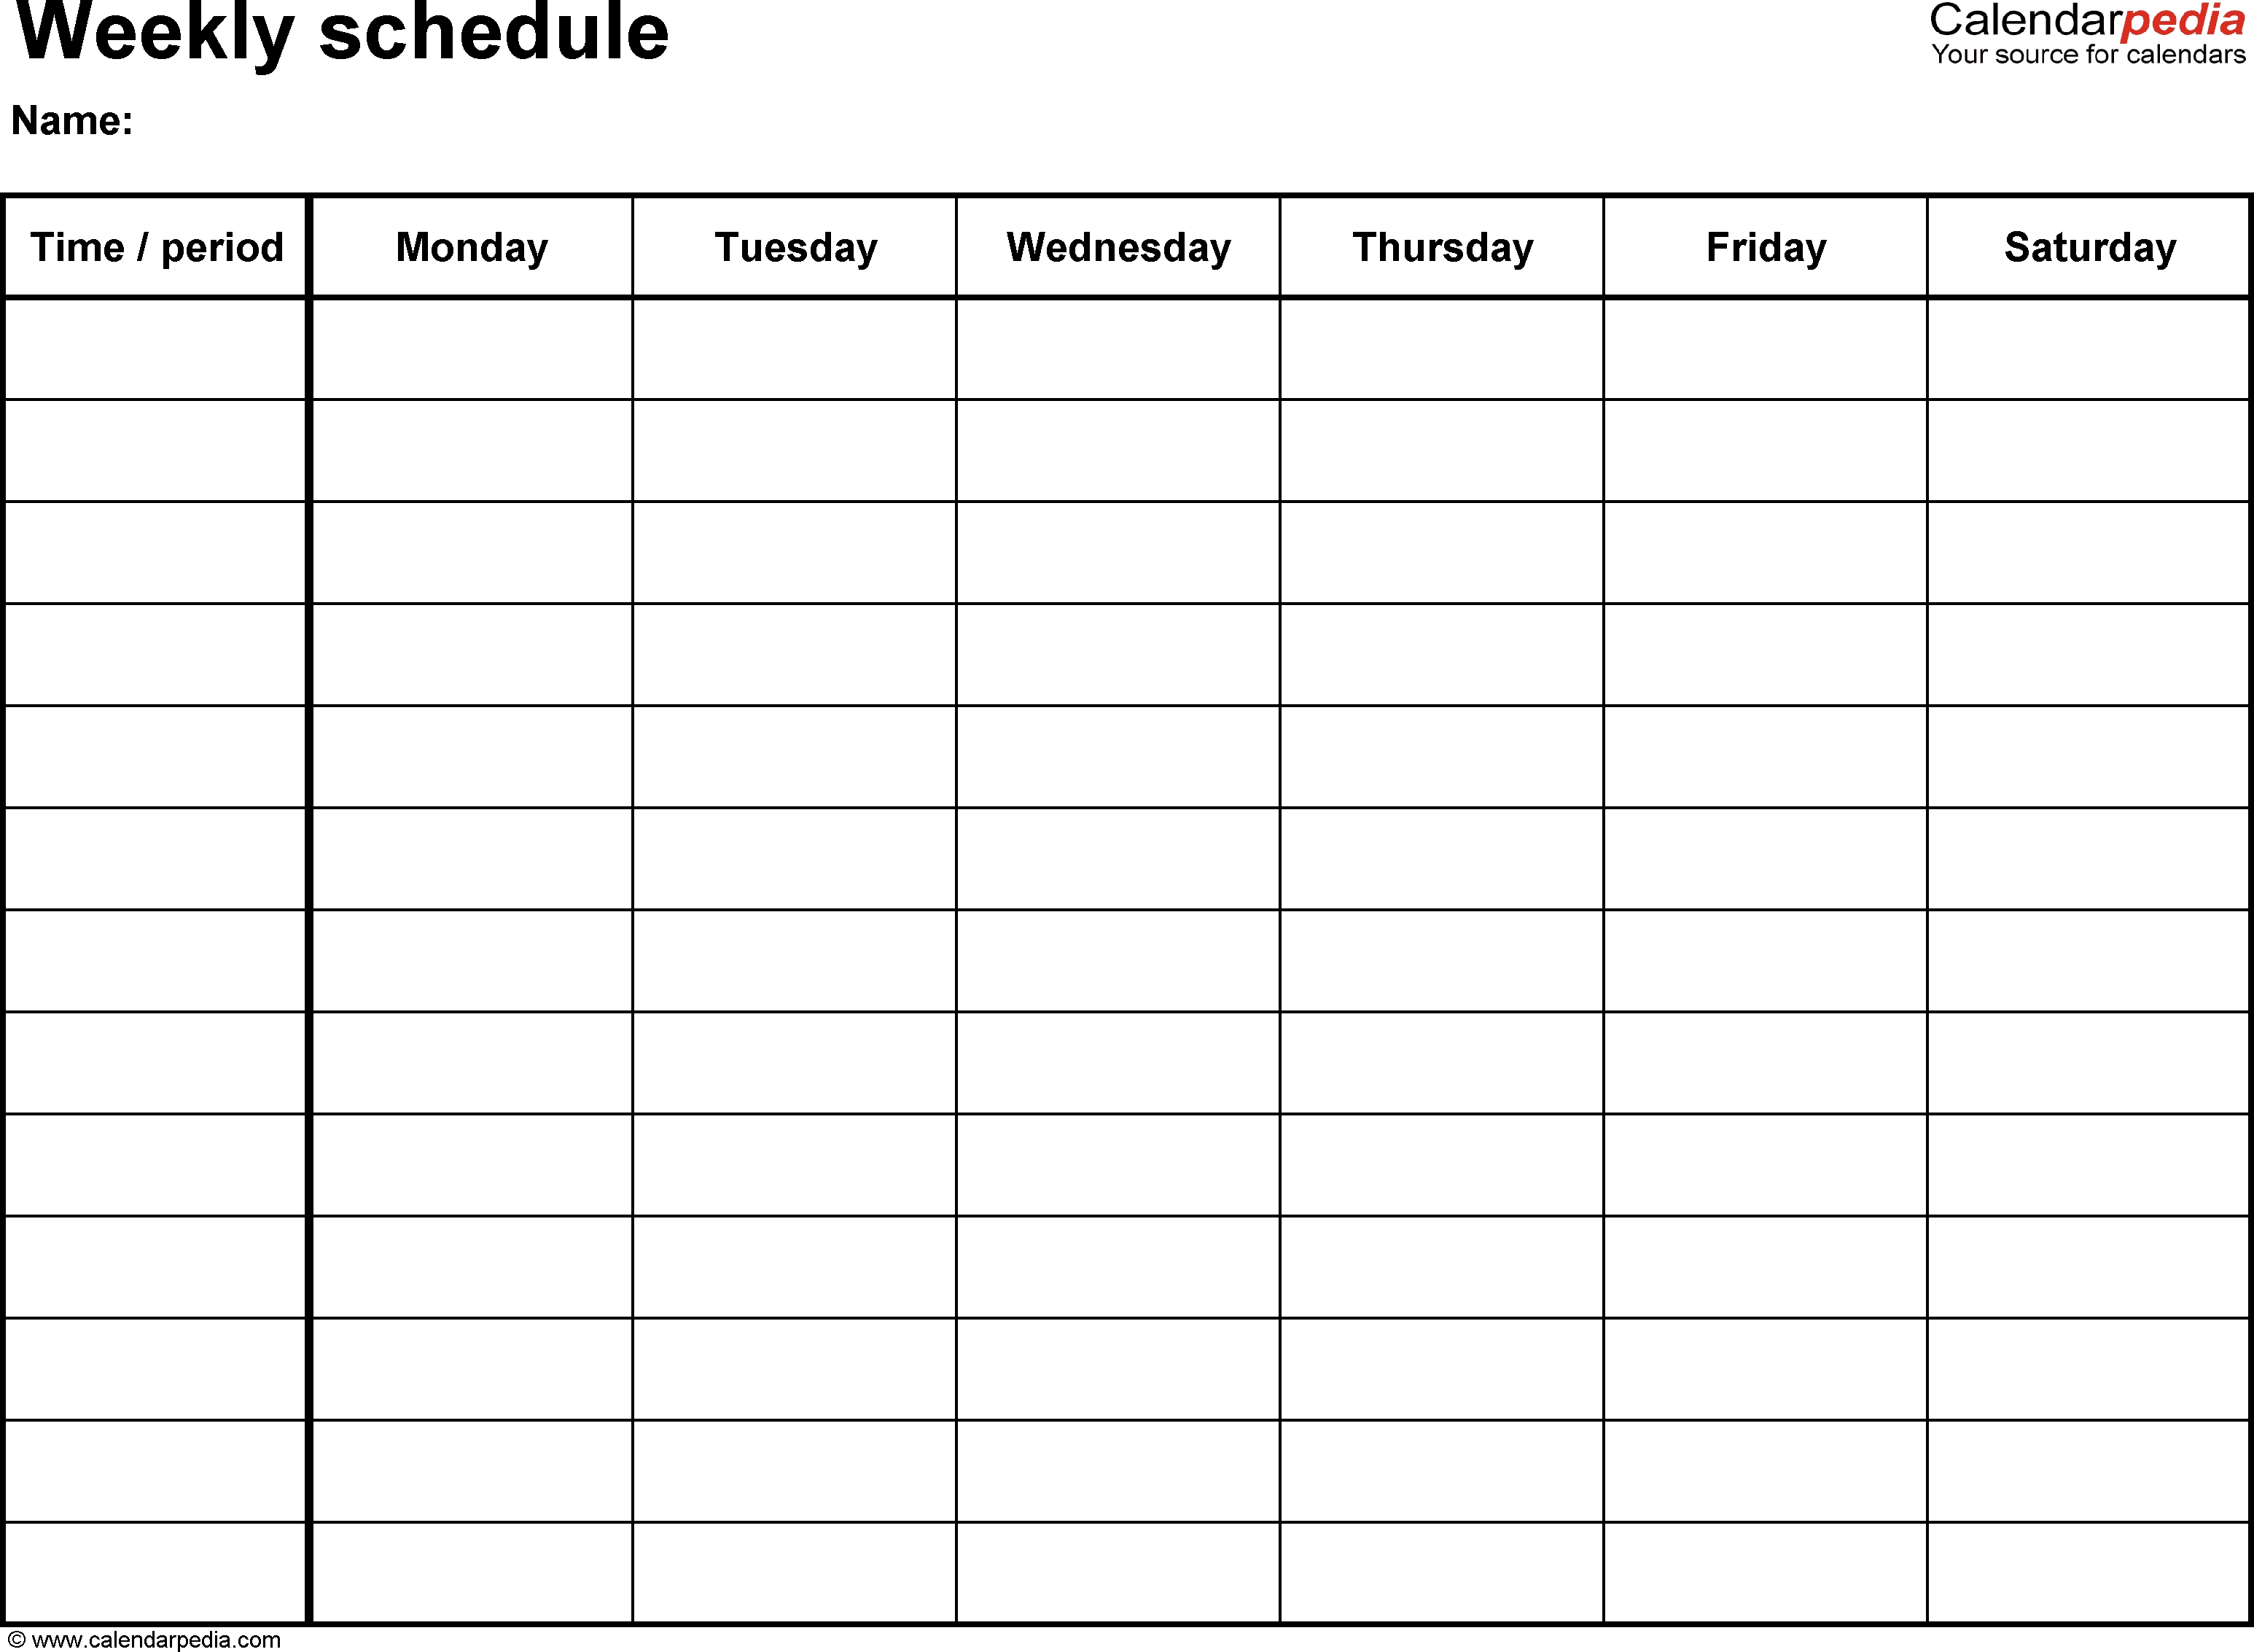 Free Weekly Schedule Templates For Excel - 18 Templates-Sun - Sat Monthly Calendar